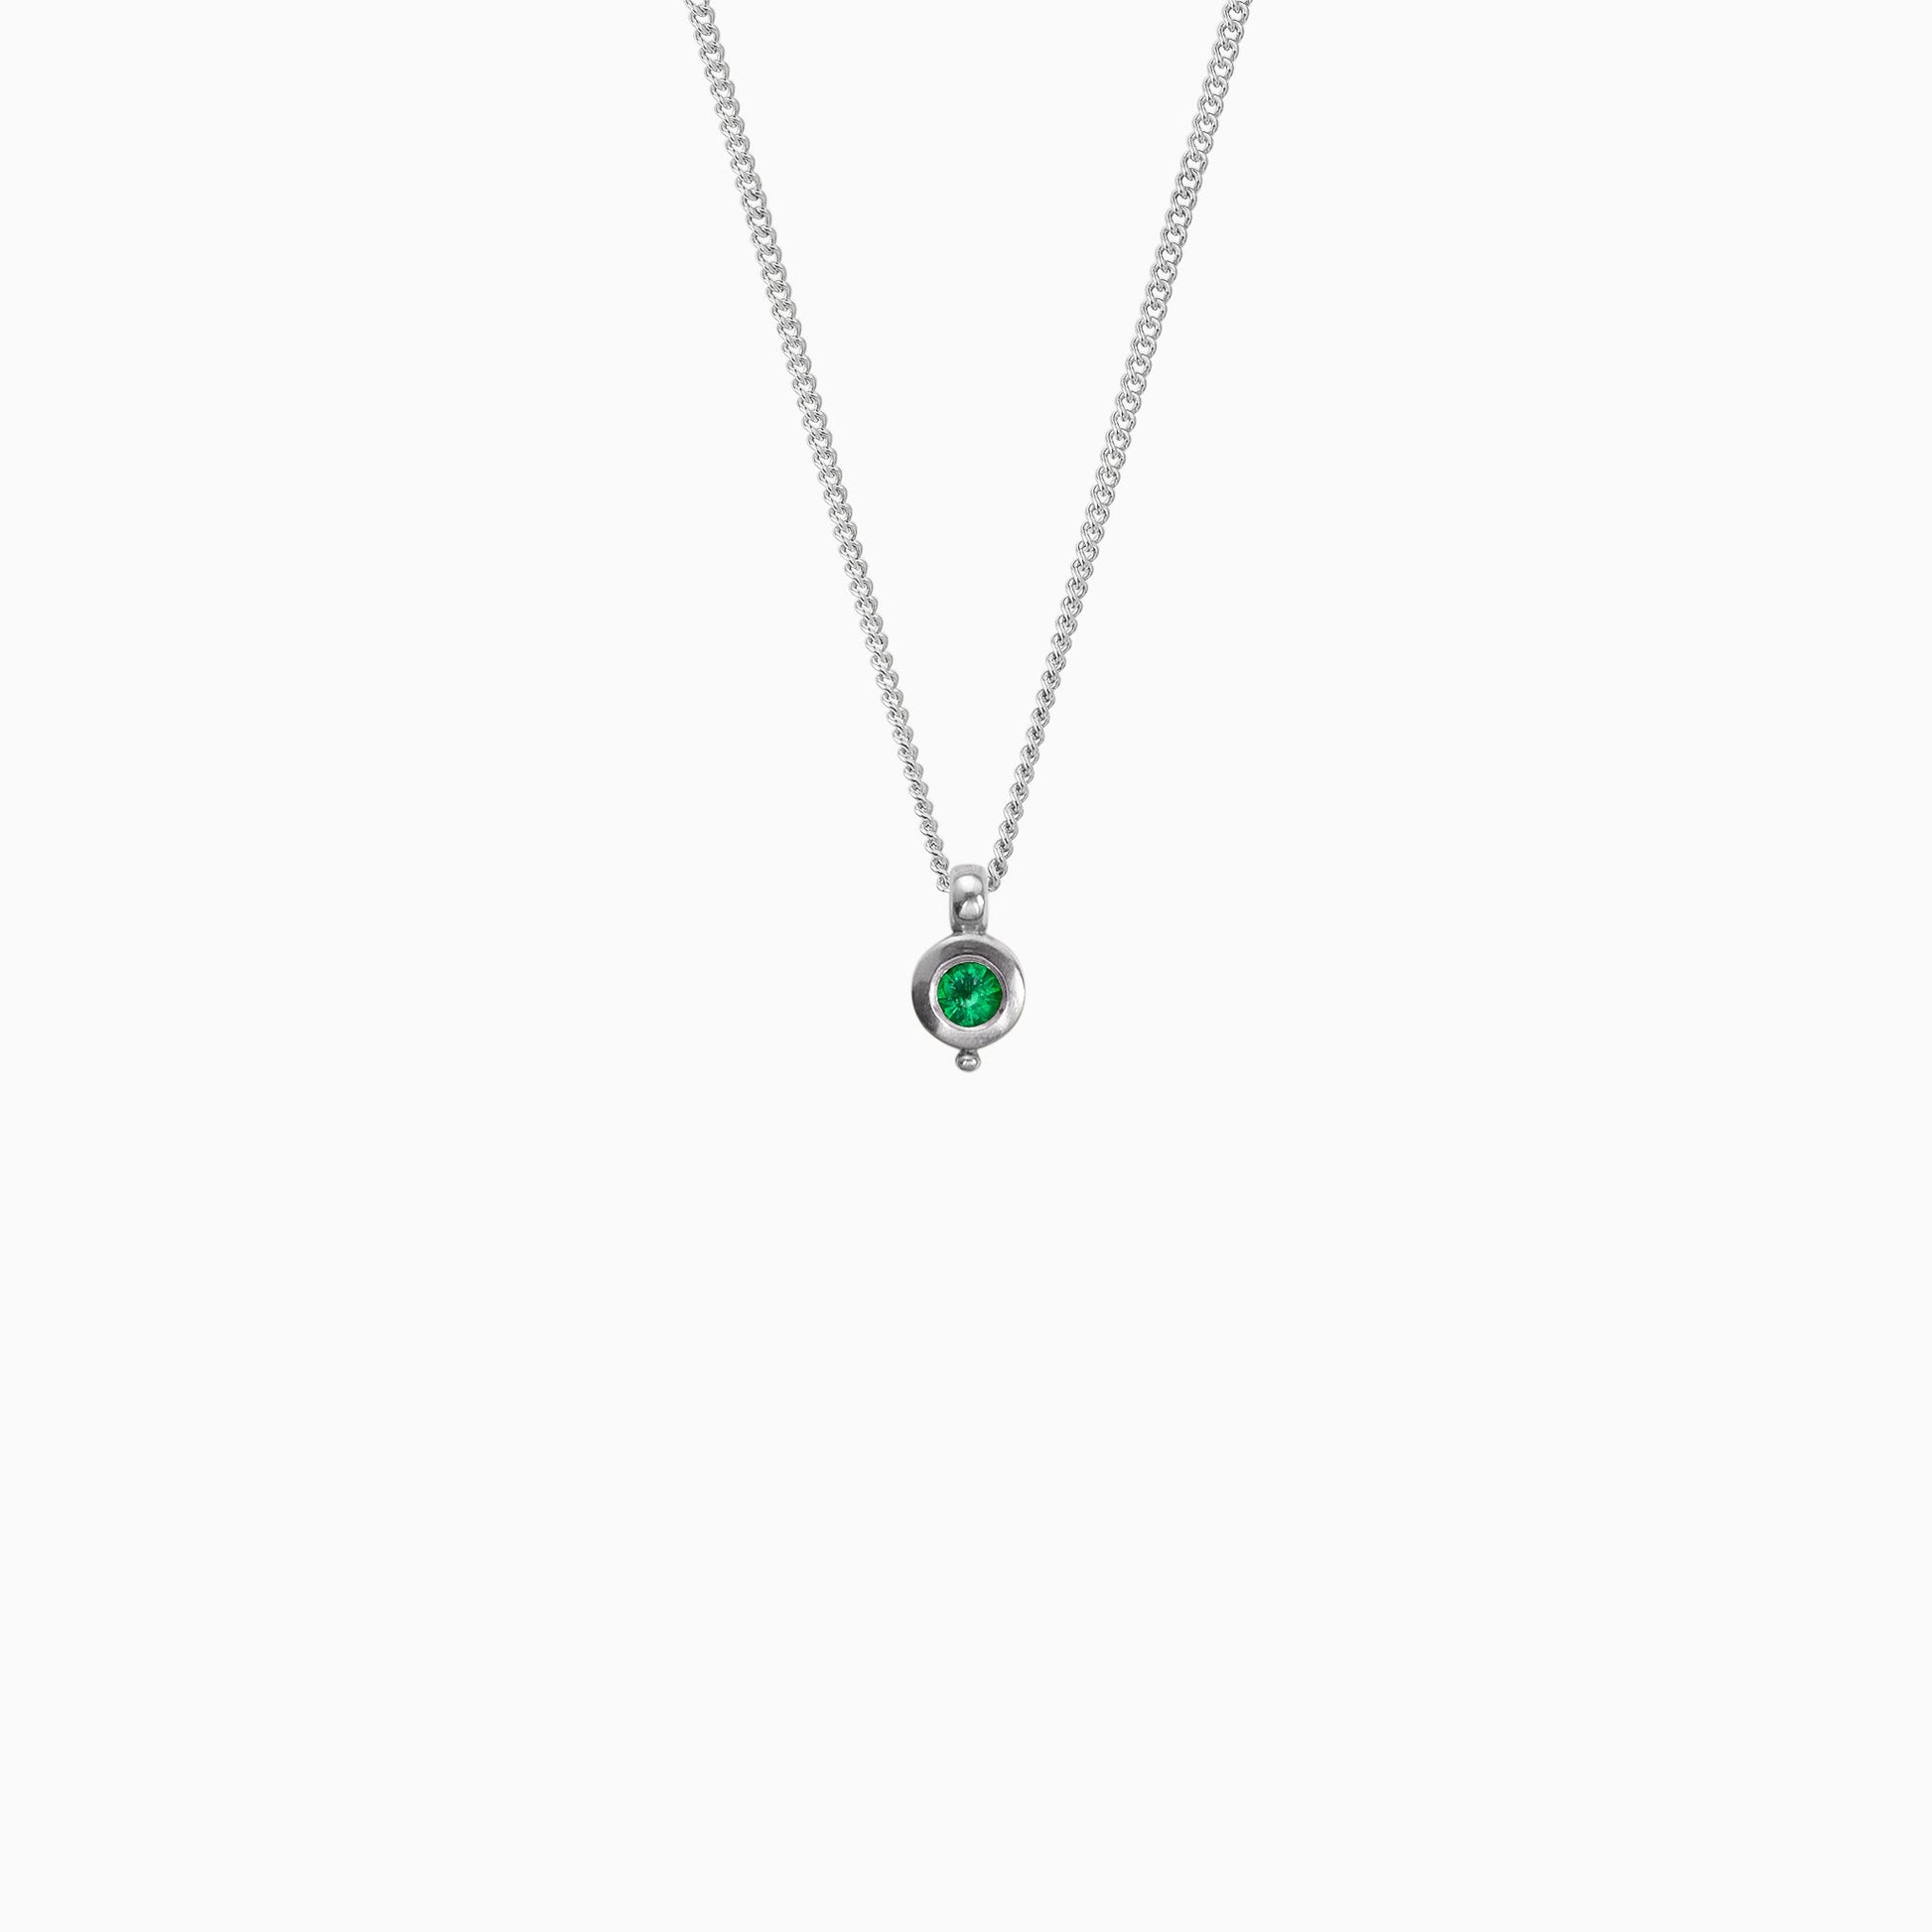 Recycled platinum round pendant 12mm  x 7mm with small round bead attached below on a 45cm fine curb chain. Set with a 4mm round emerald.